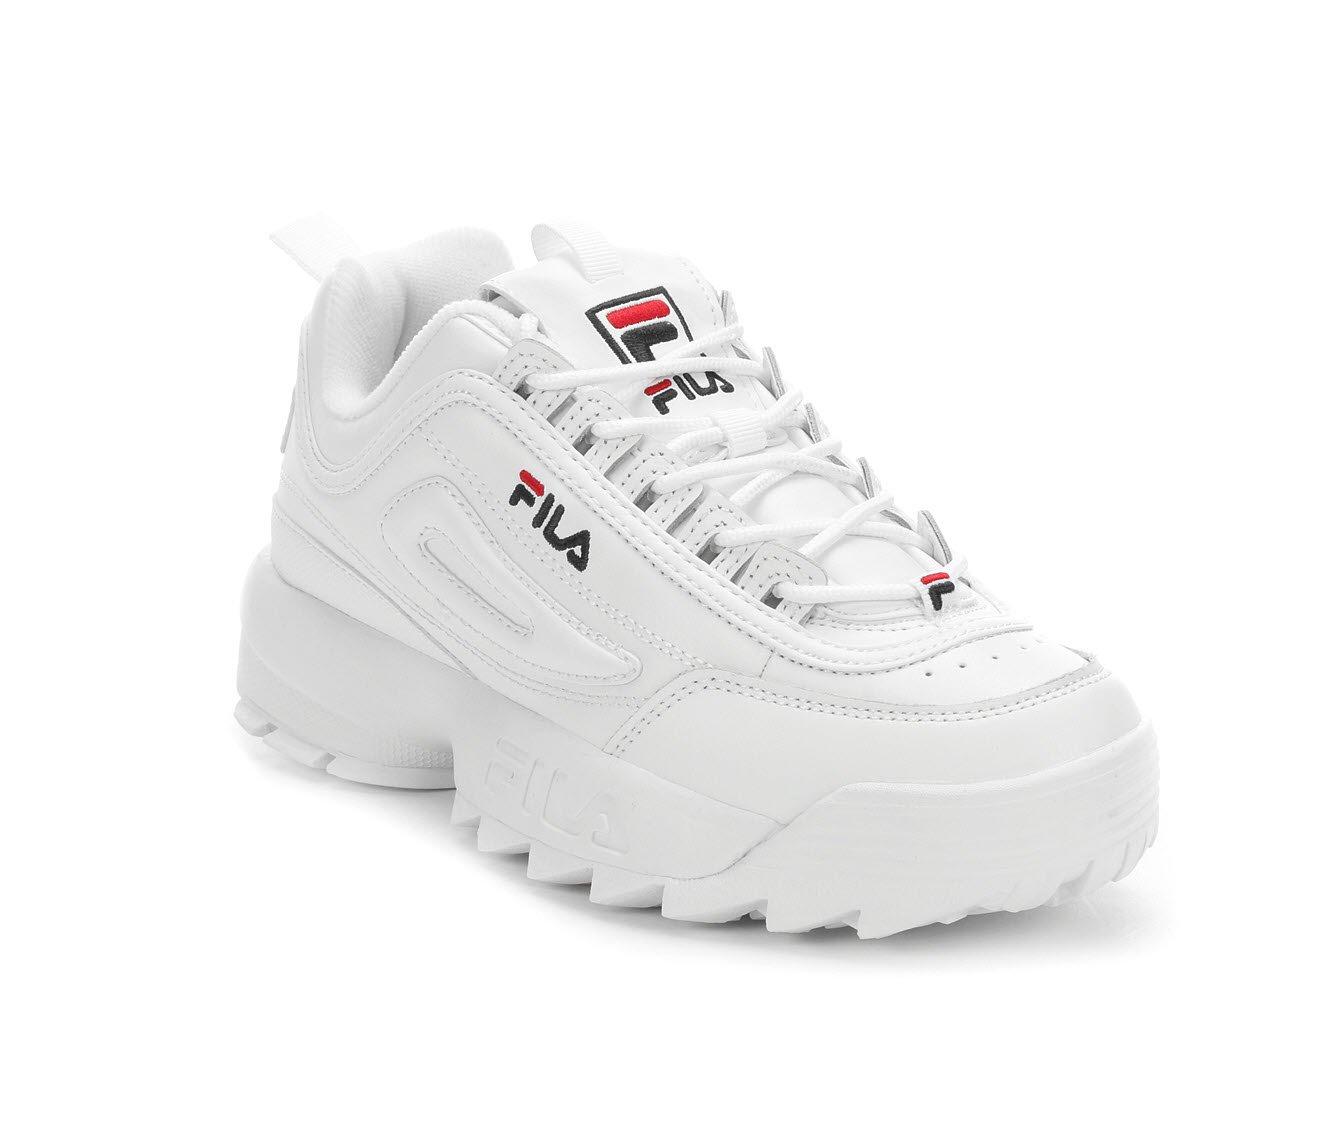 Fila Men's Disruptor II Casual Athletic Sneakers from Finish Line